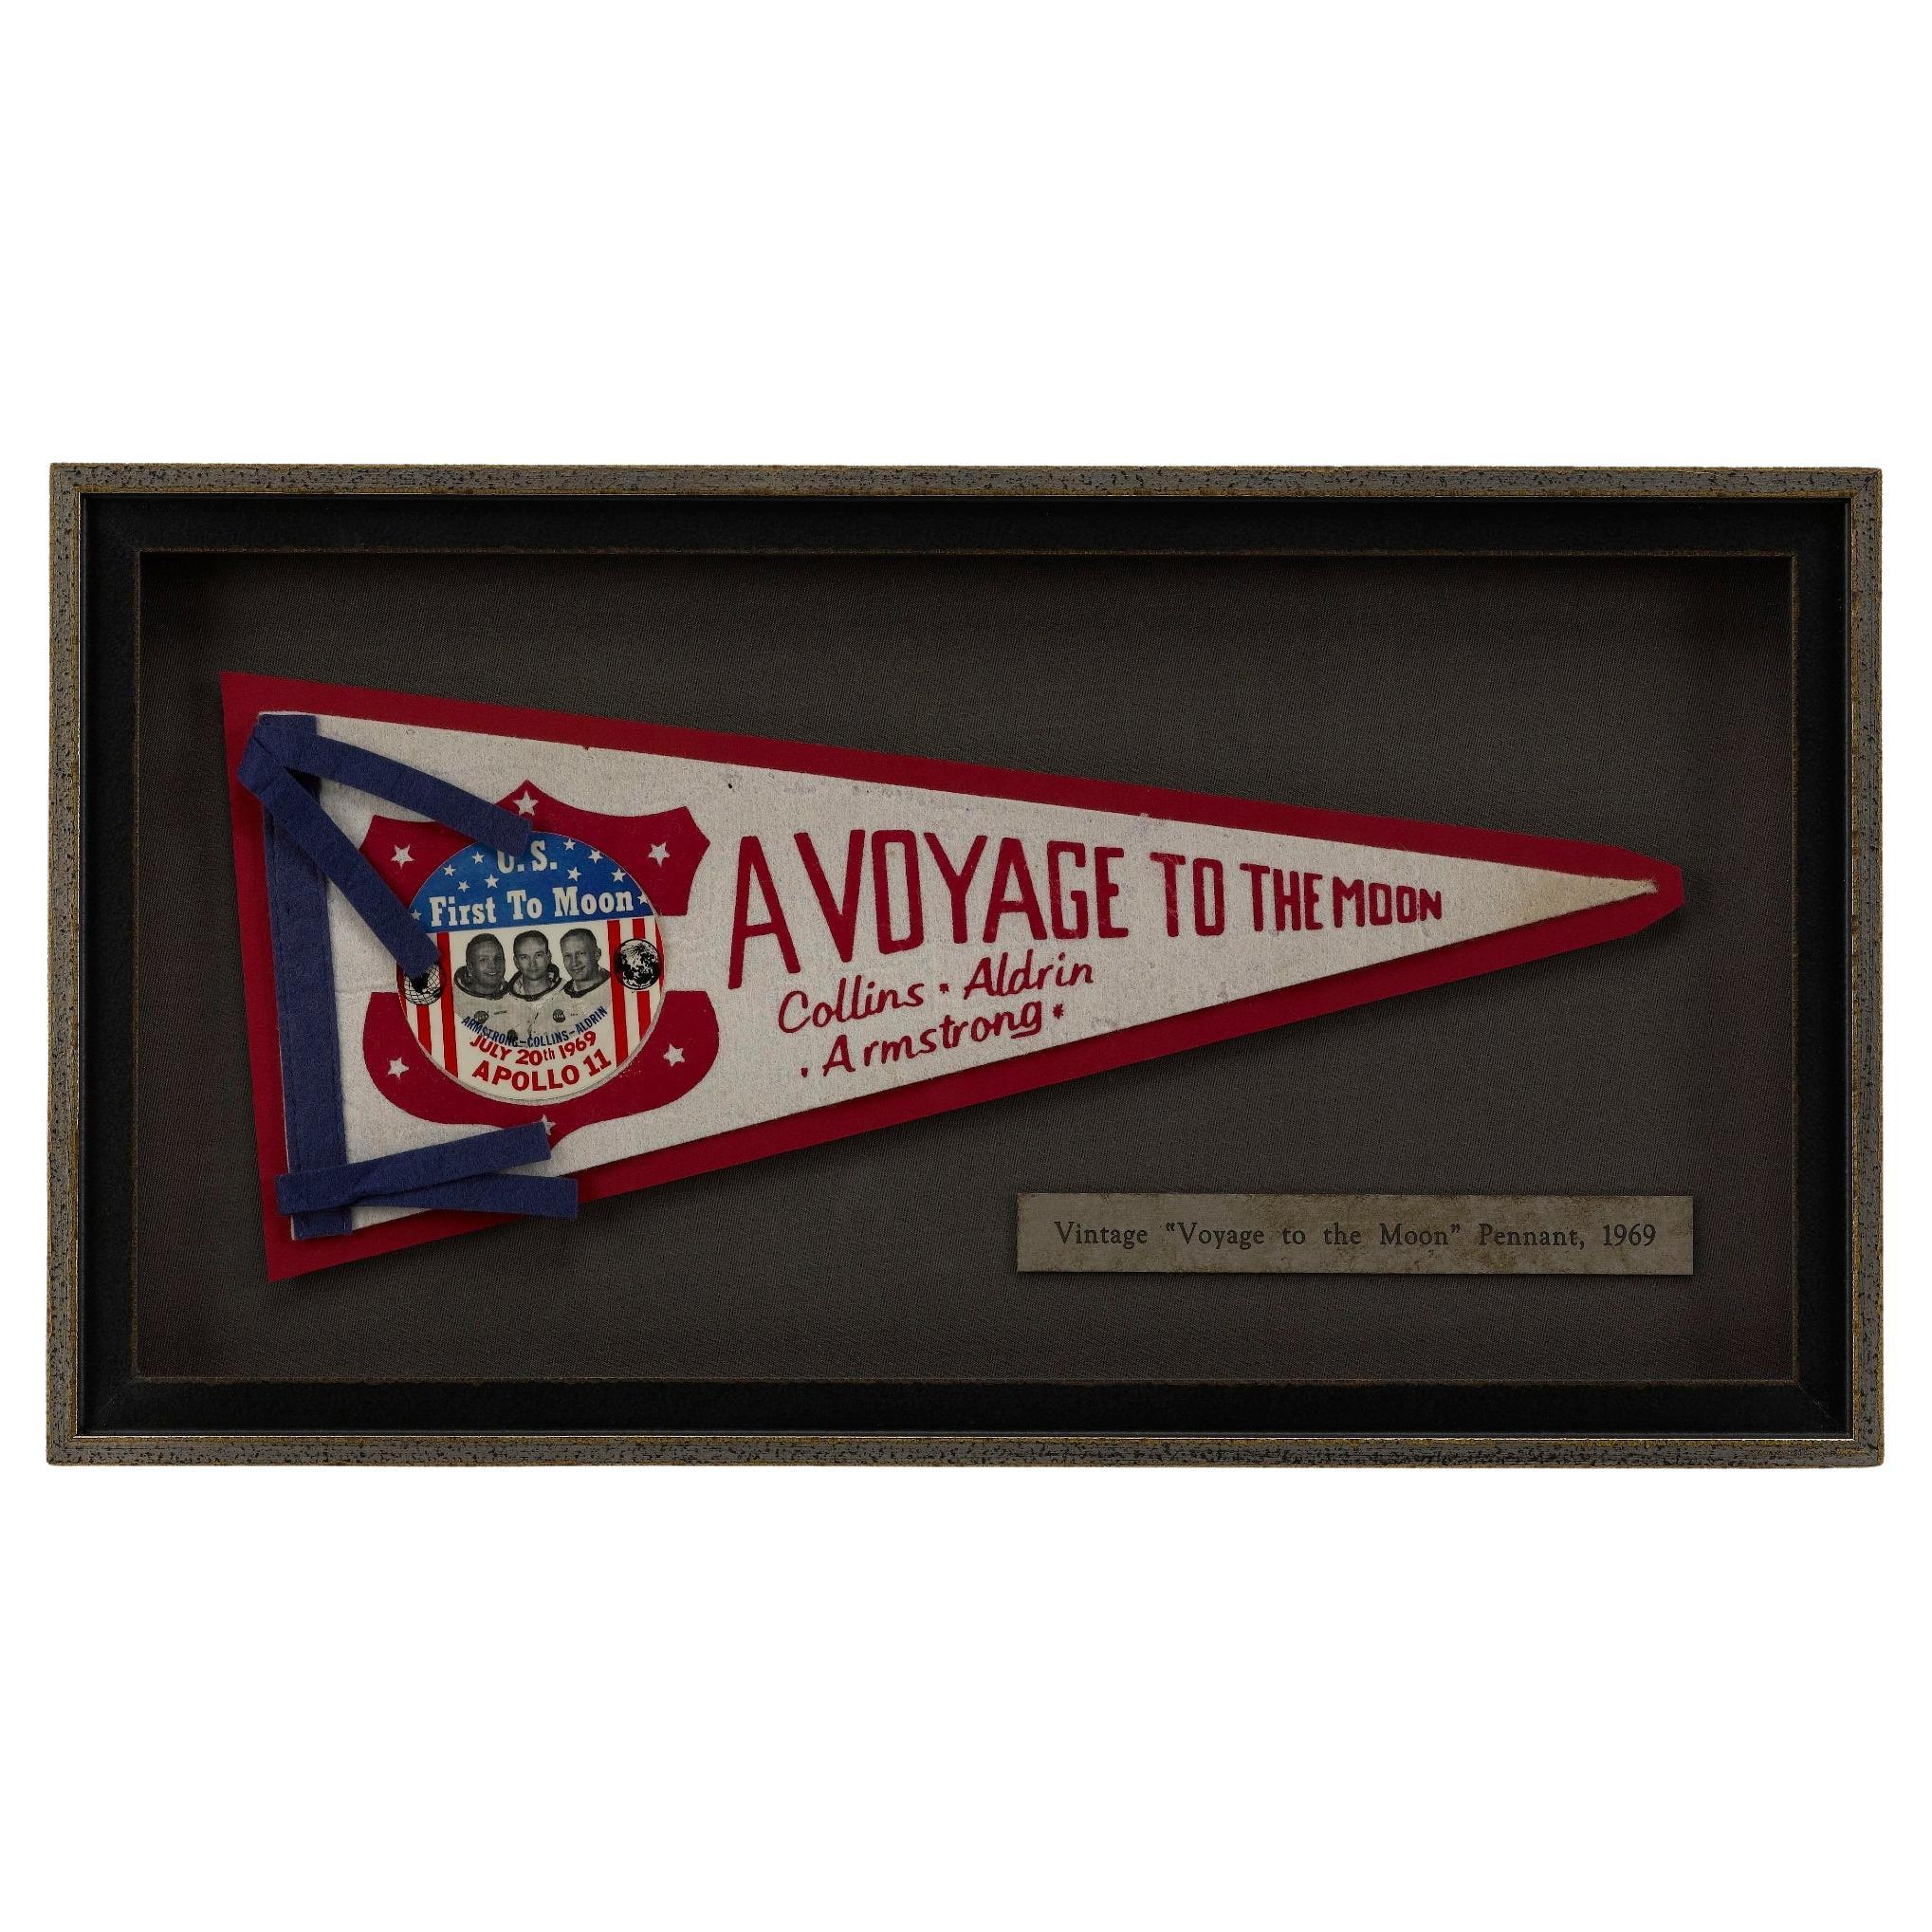 Vintage Apollo 11 "Voyage to the Moon" Pennant, 1969 For Sale